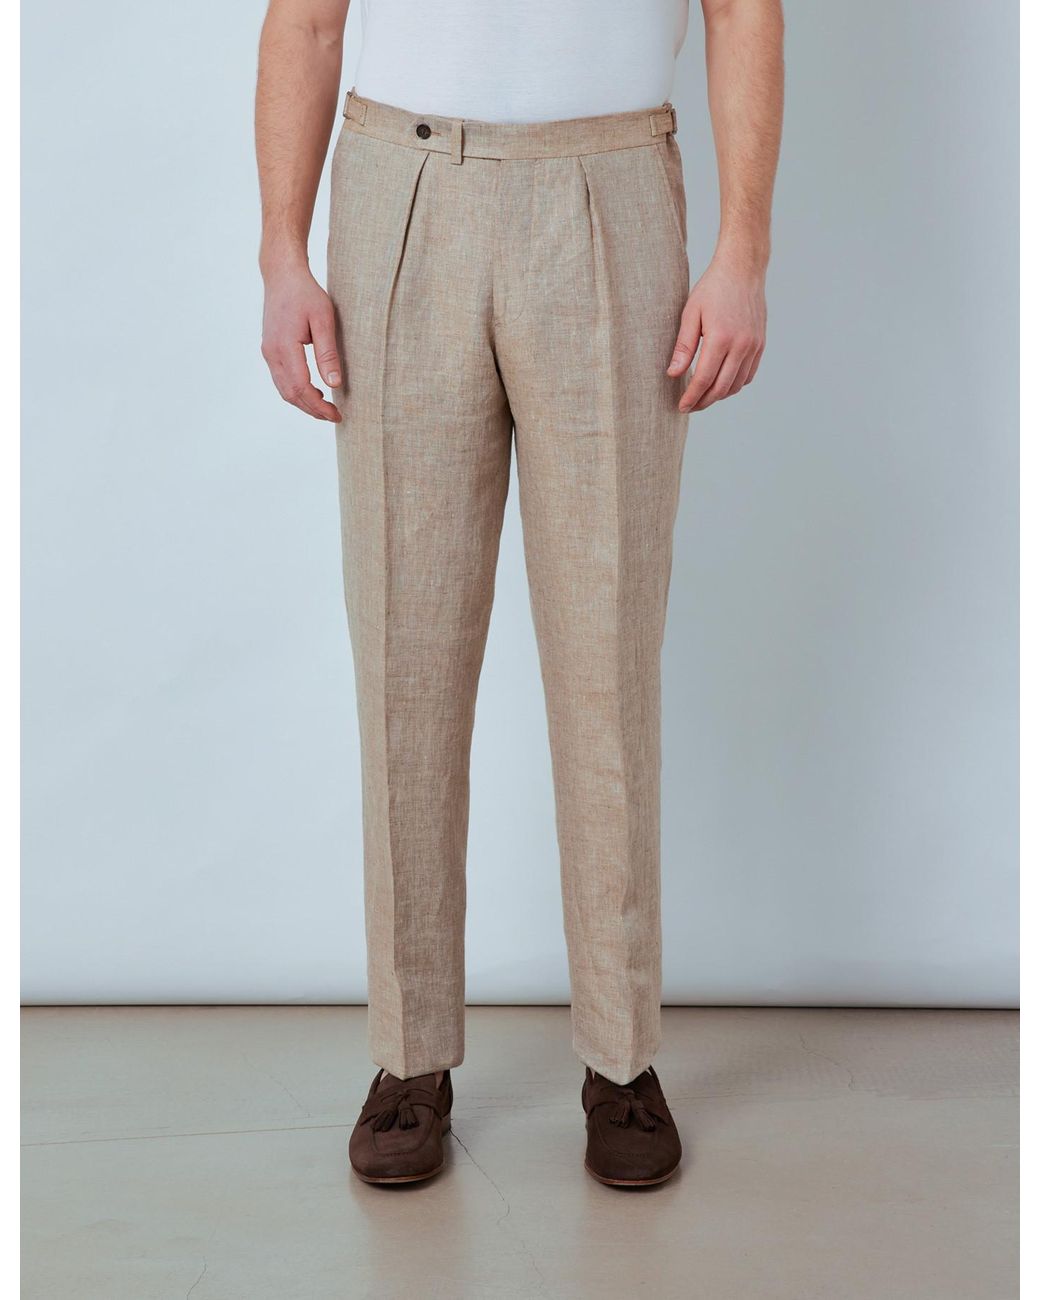 Hawes & Curtis Curtis Beige Linen Pleated Tailored Fit Linen Trousers -  1913 Collection in Natural for Men - Lyst